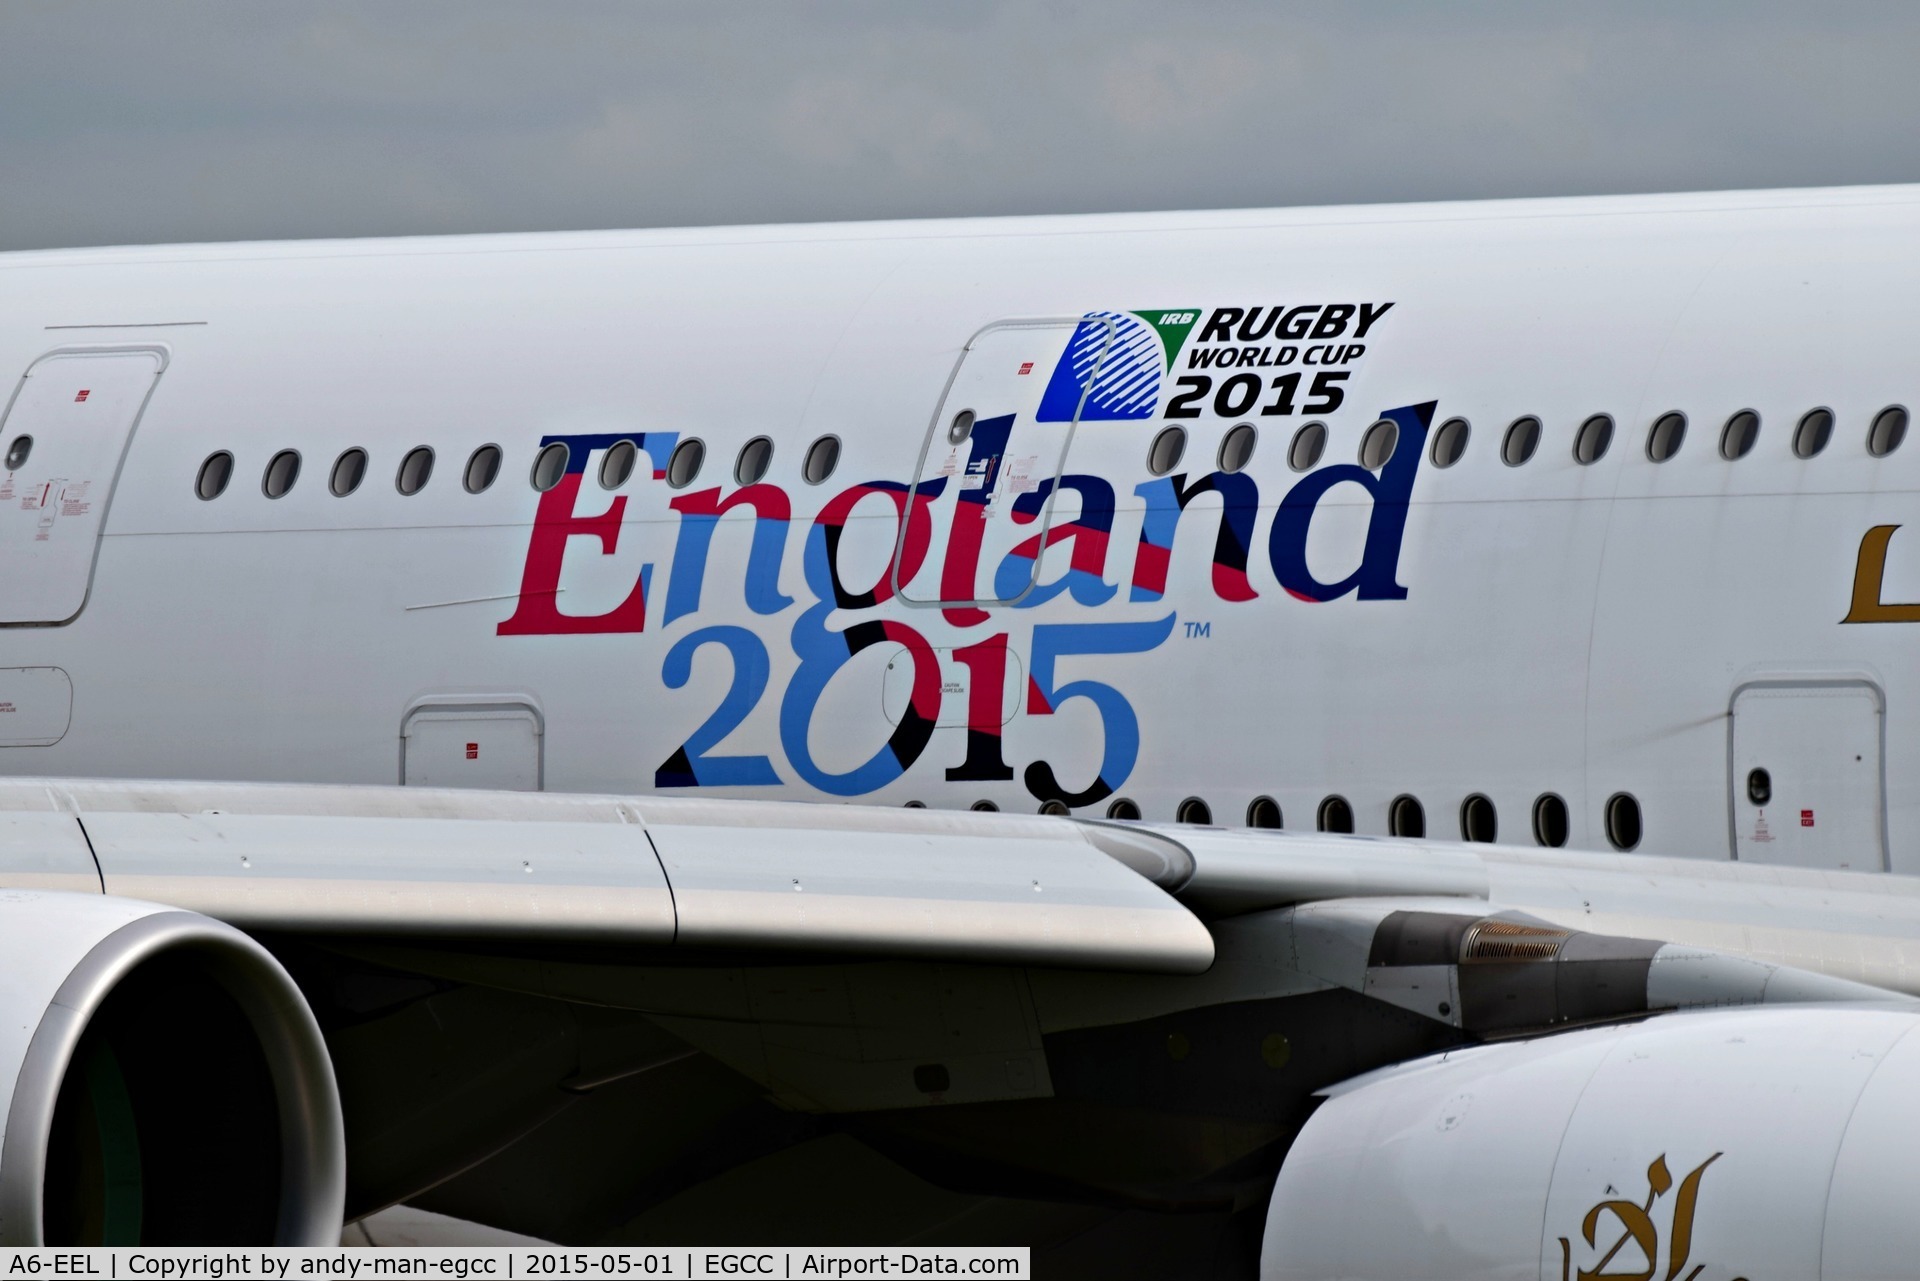 A6-EEL, 2013 Airbus A380-861 C/N 133, has

rugby world cup 2015
england 2015

on the side of the aircraft